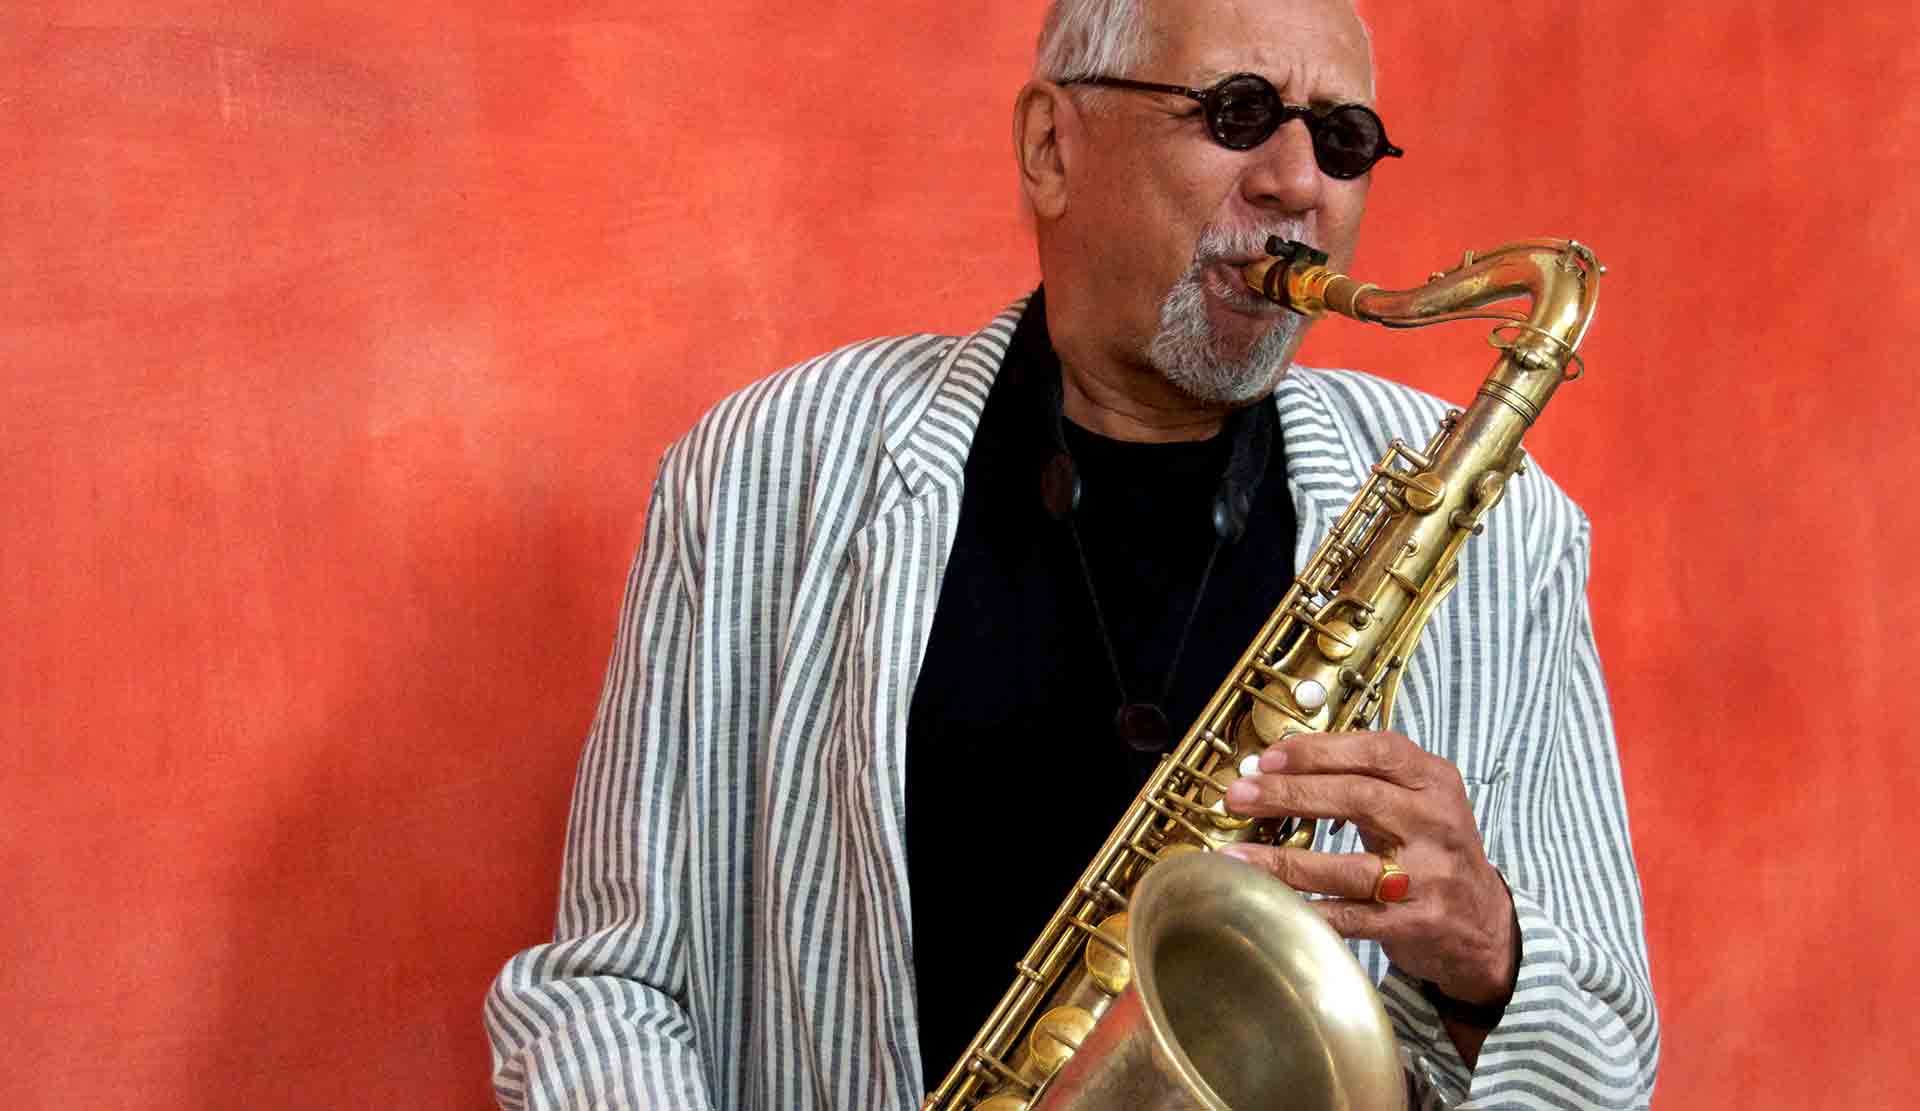 Charles Lloyd-Williams Center for the Arts